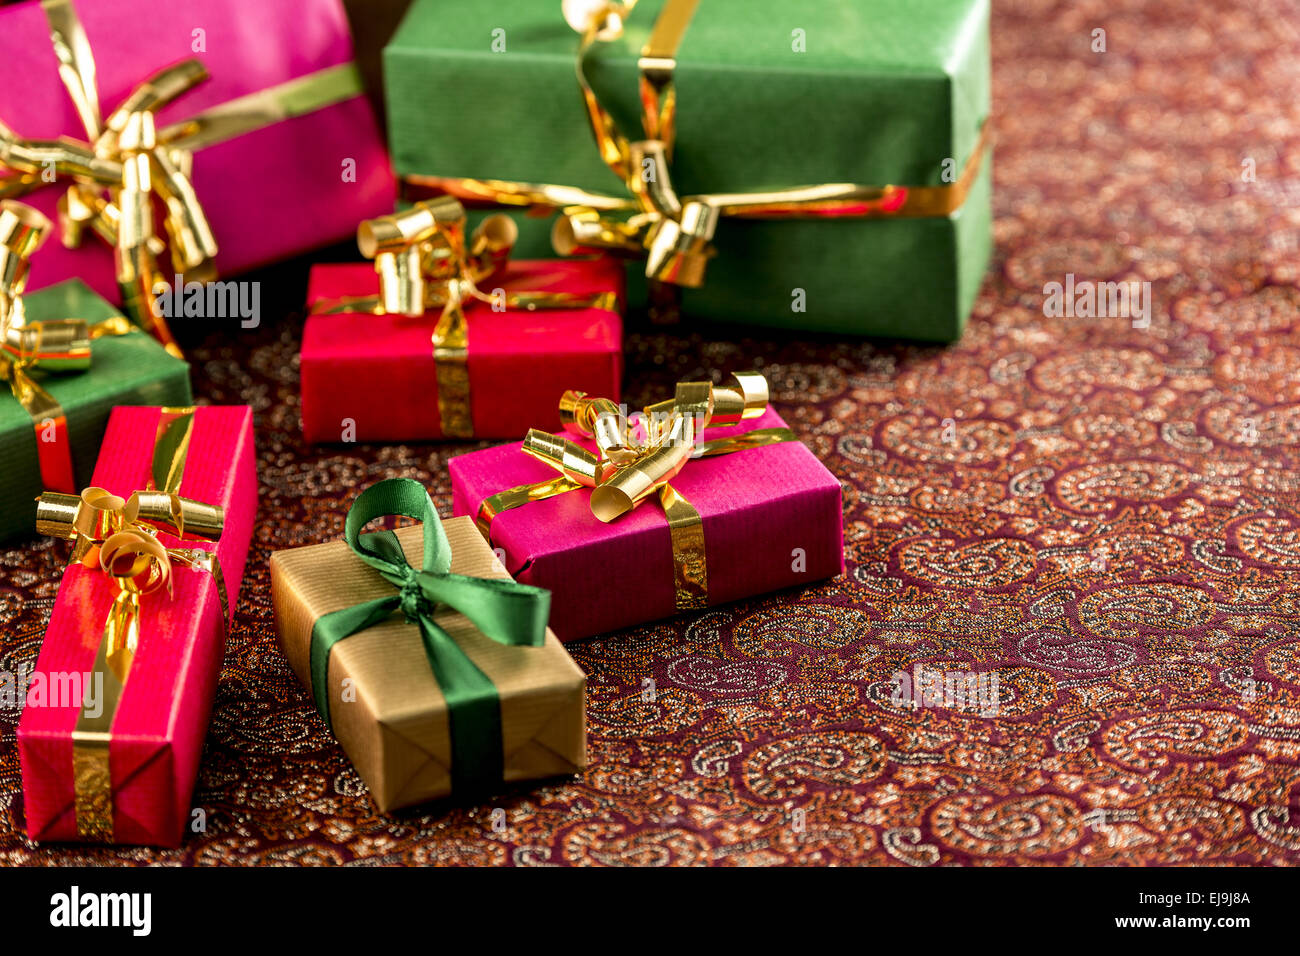 Seven Small Gifts on a Festive Blanket Stock Photo